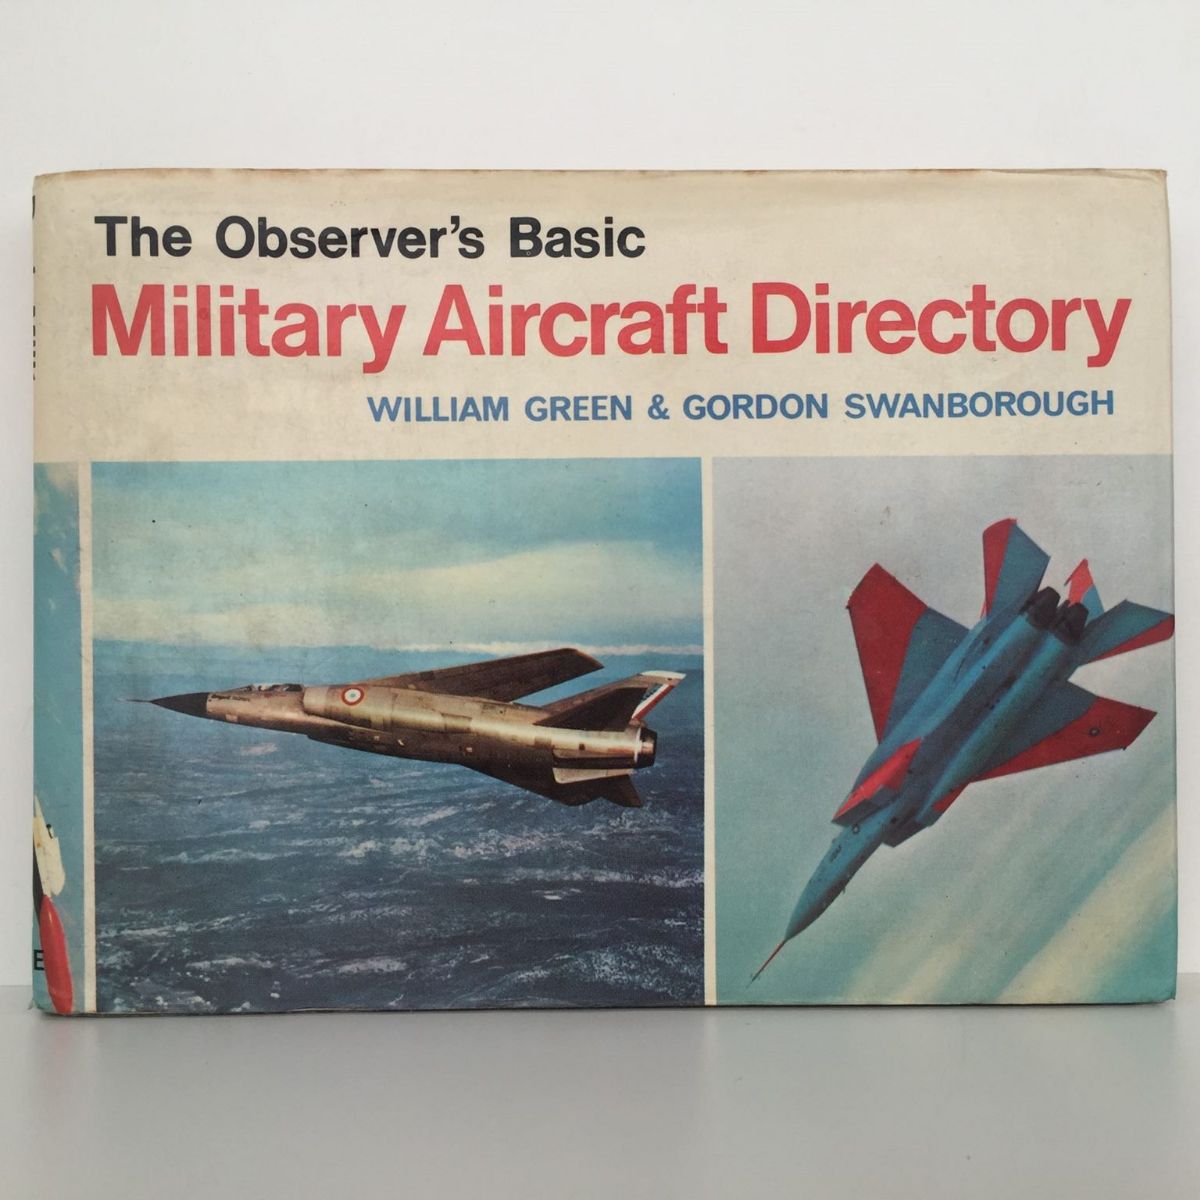 The Observer's Basic Military Aircraft Directory